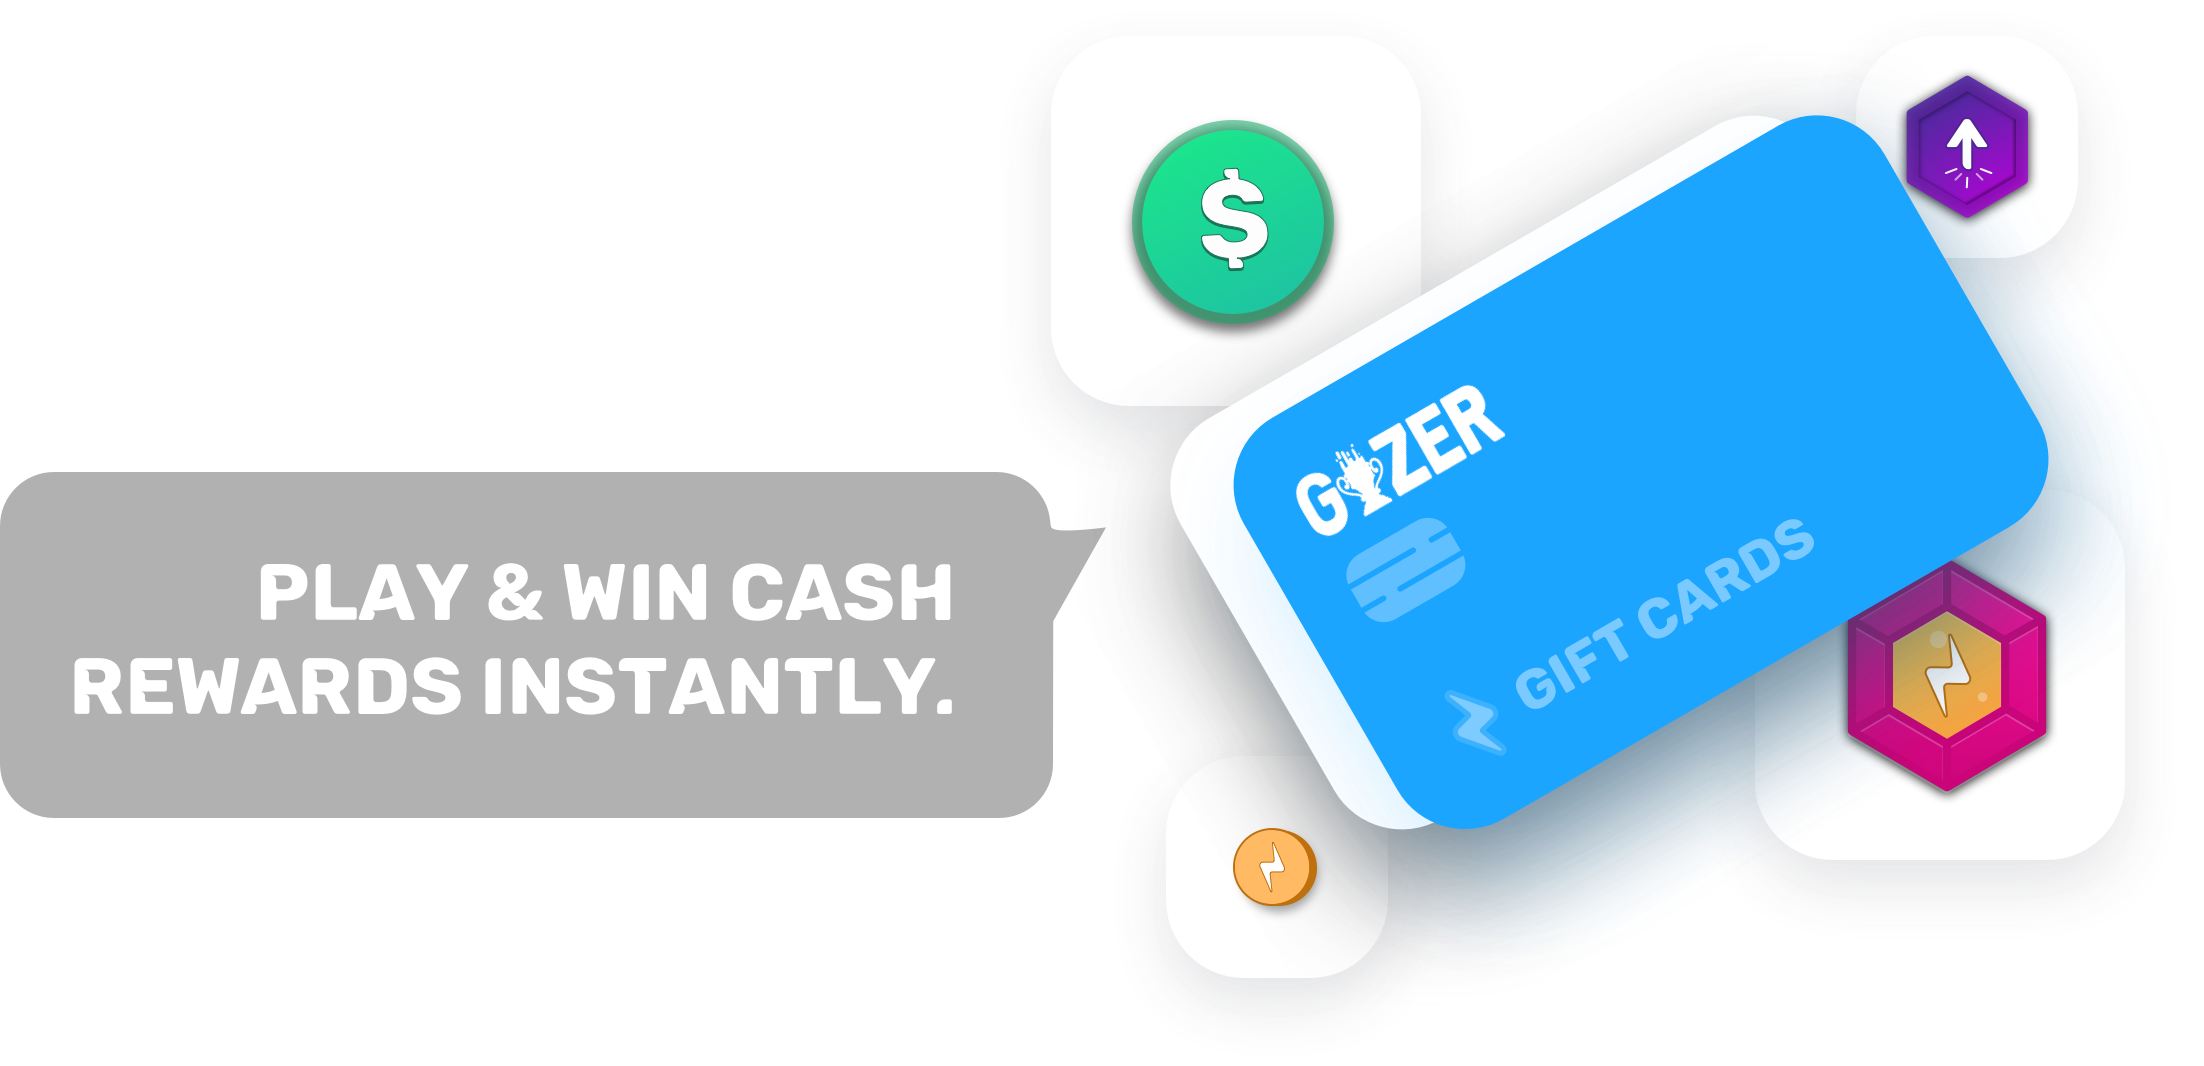 Play for cash prizes instantly, redeem rewards like gift cards!